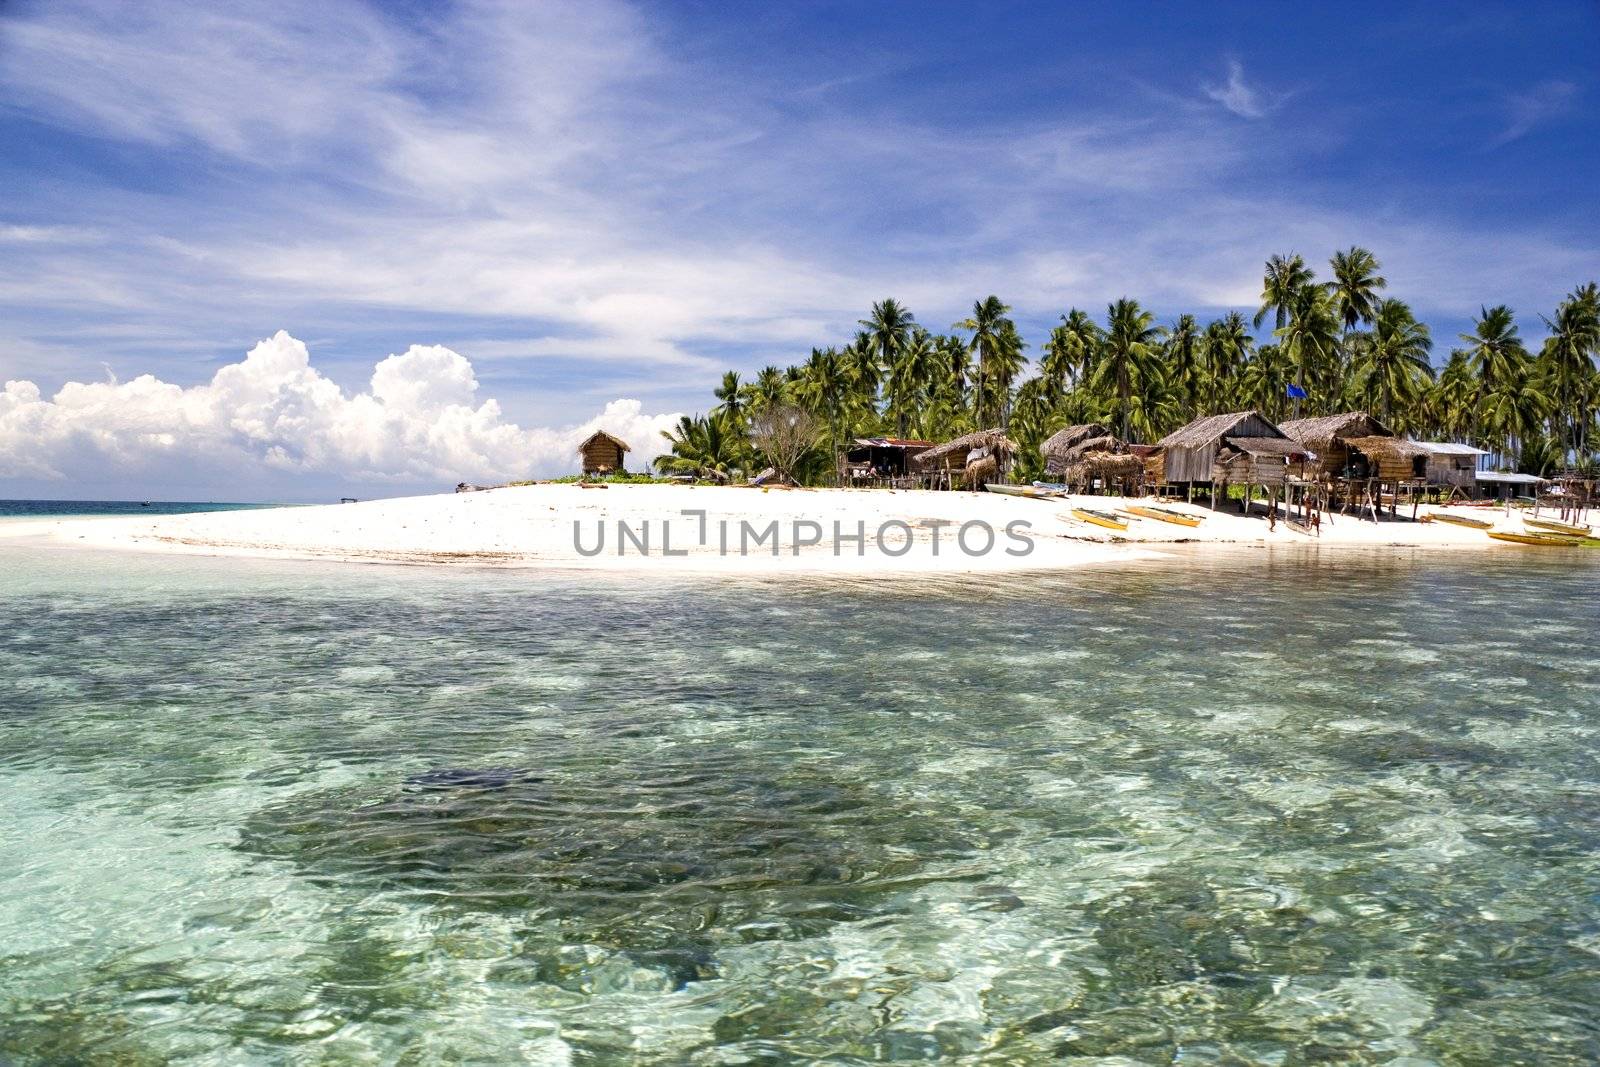 Image of a remote Malaysian tropical island with deep blue skies, crystal clear waters, atap huts and coconut trees.